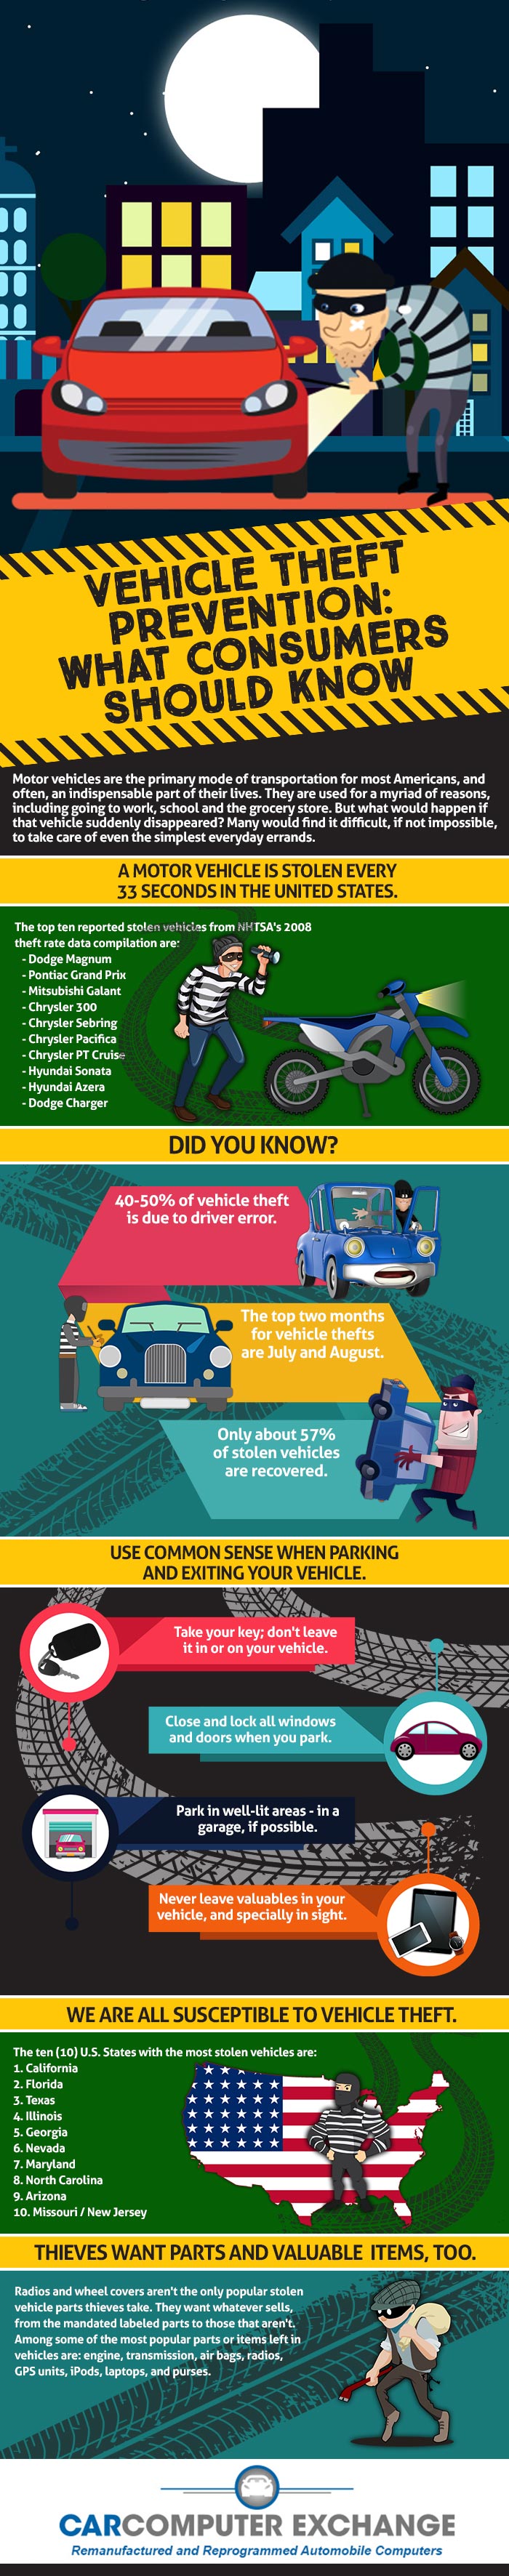 infographic---184-car-theid